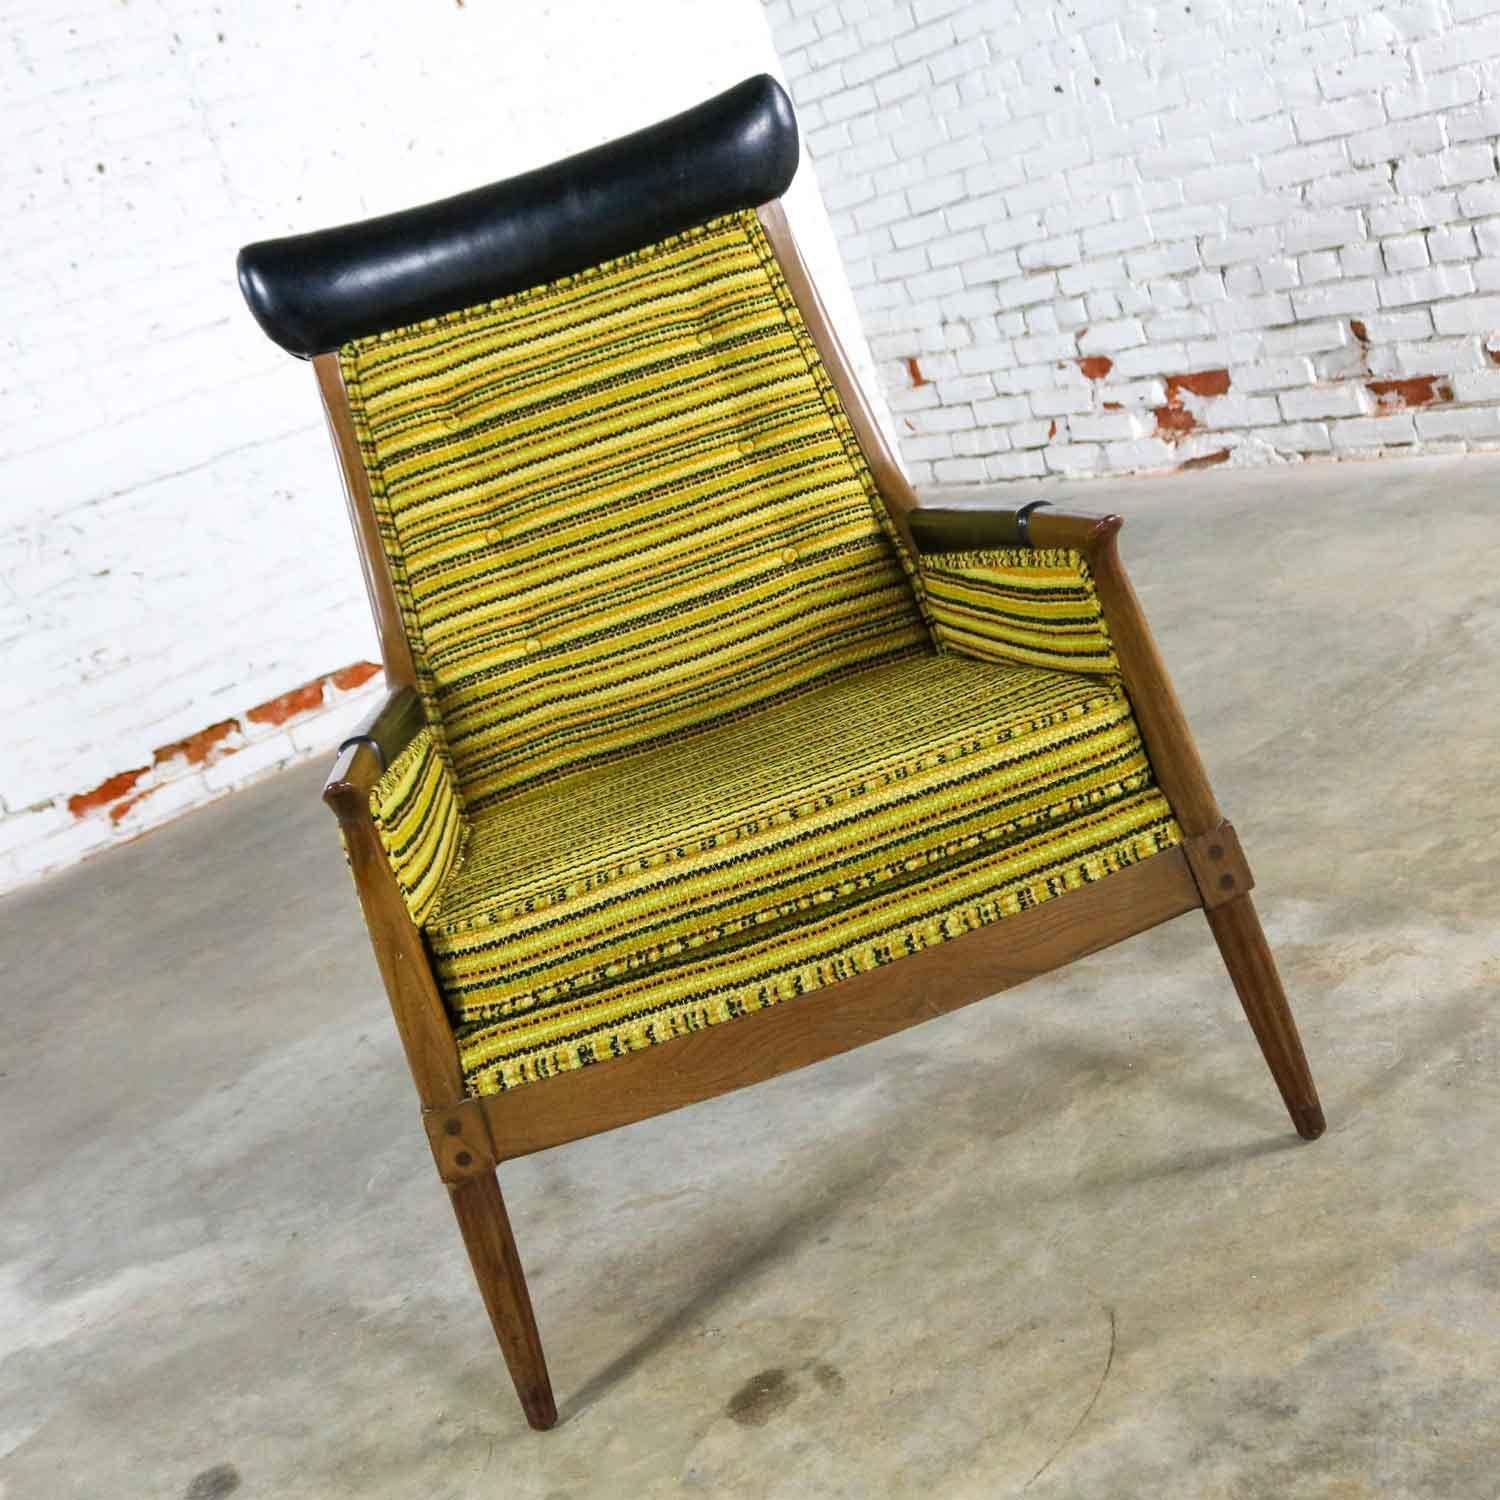 Awesome Mid-Century Modern horn style armchair in its original green, gold, and black striped upholstery with black faux leather accent and wood legs and arms. In wonderful vintage condition. Please see photos. Circa 1950s-1960s.

This exceptional